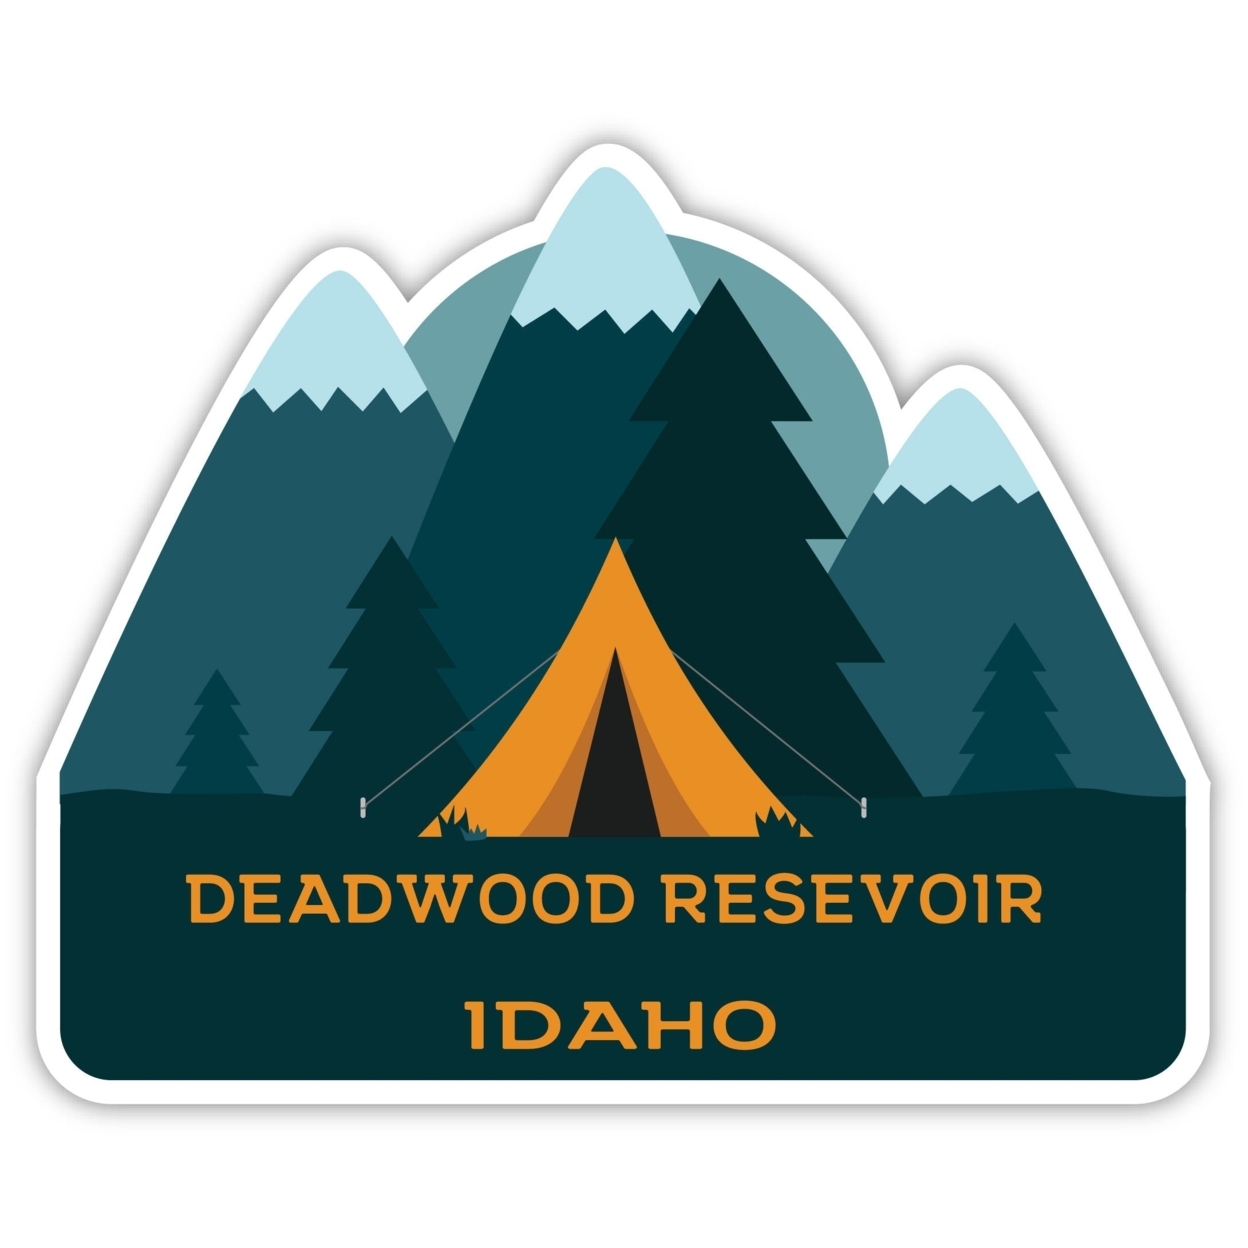 Deadwood Resevoir Idaho Souvenir Decorative Stickers (Choose Theme And Size) - 4-Pack, 10-Inch, Tent